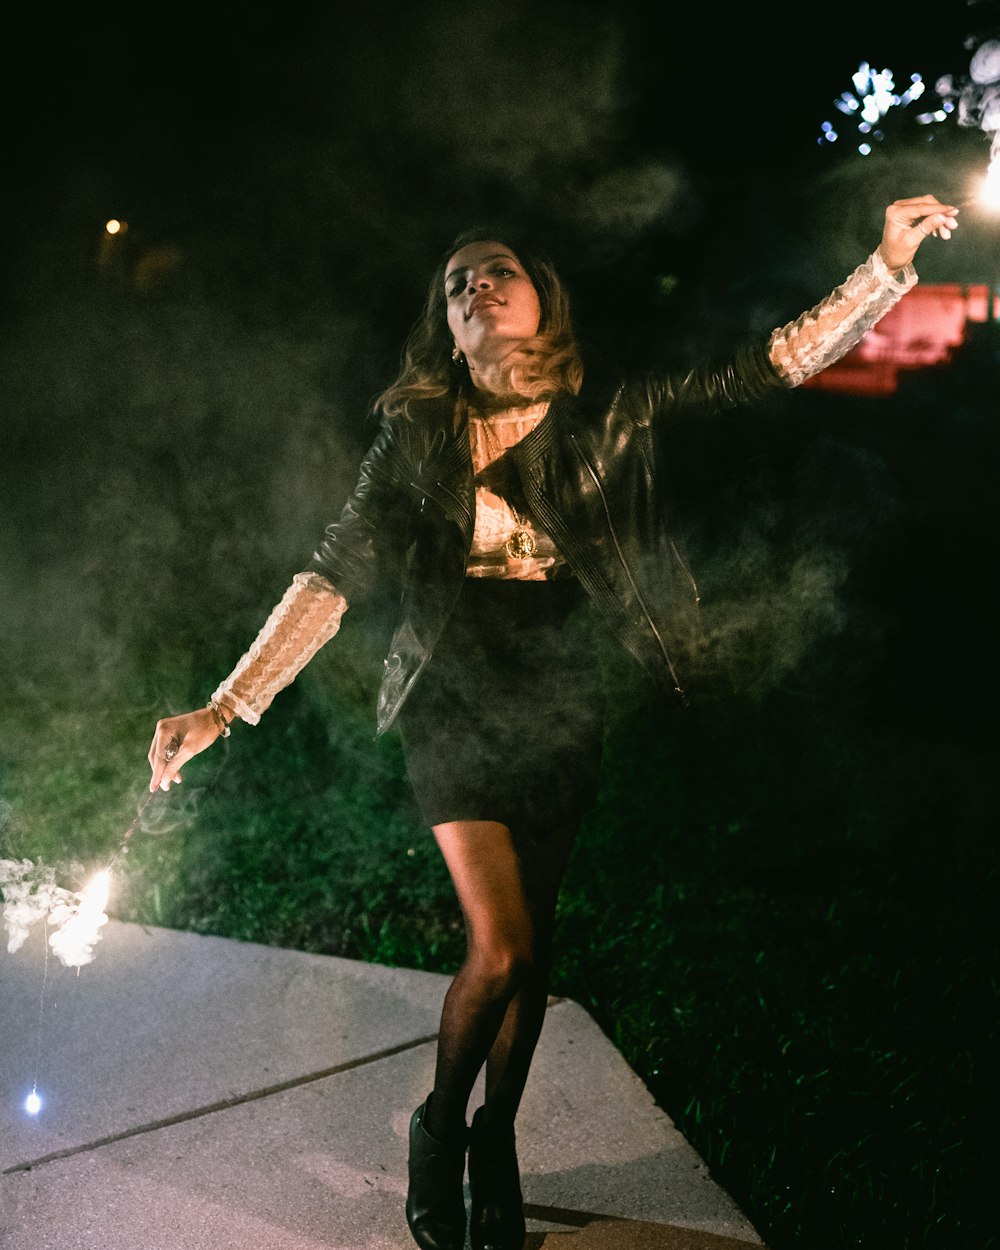 standing woman hands holding sparklers at night